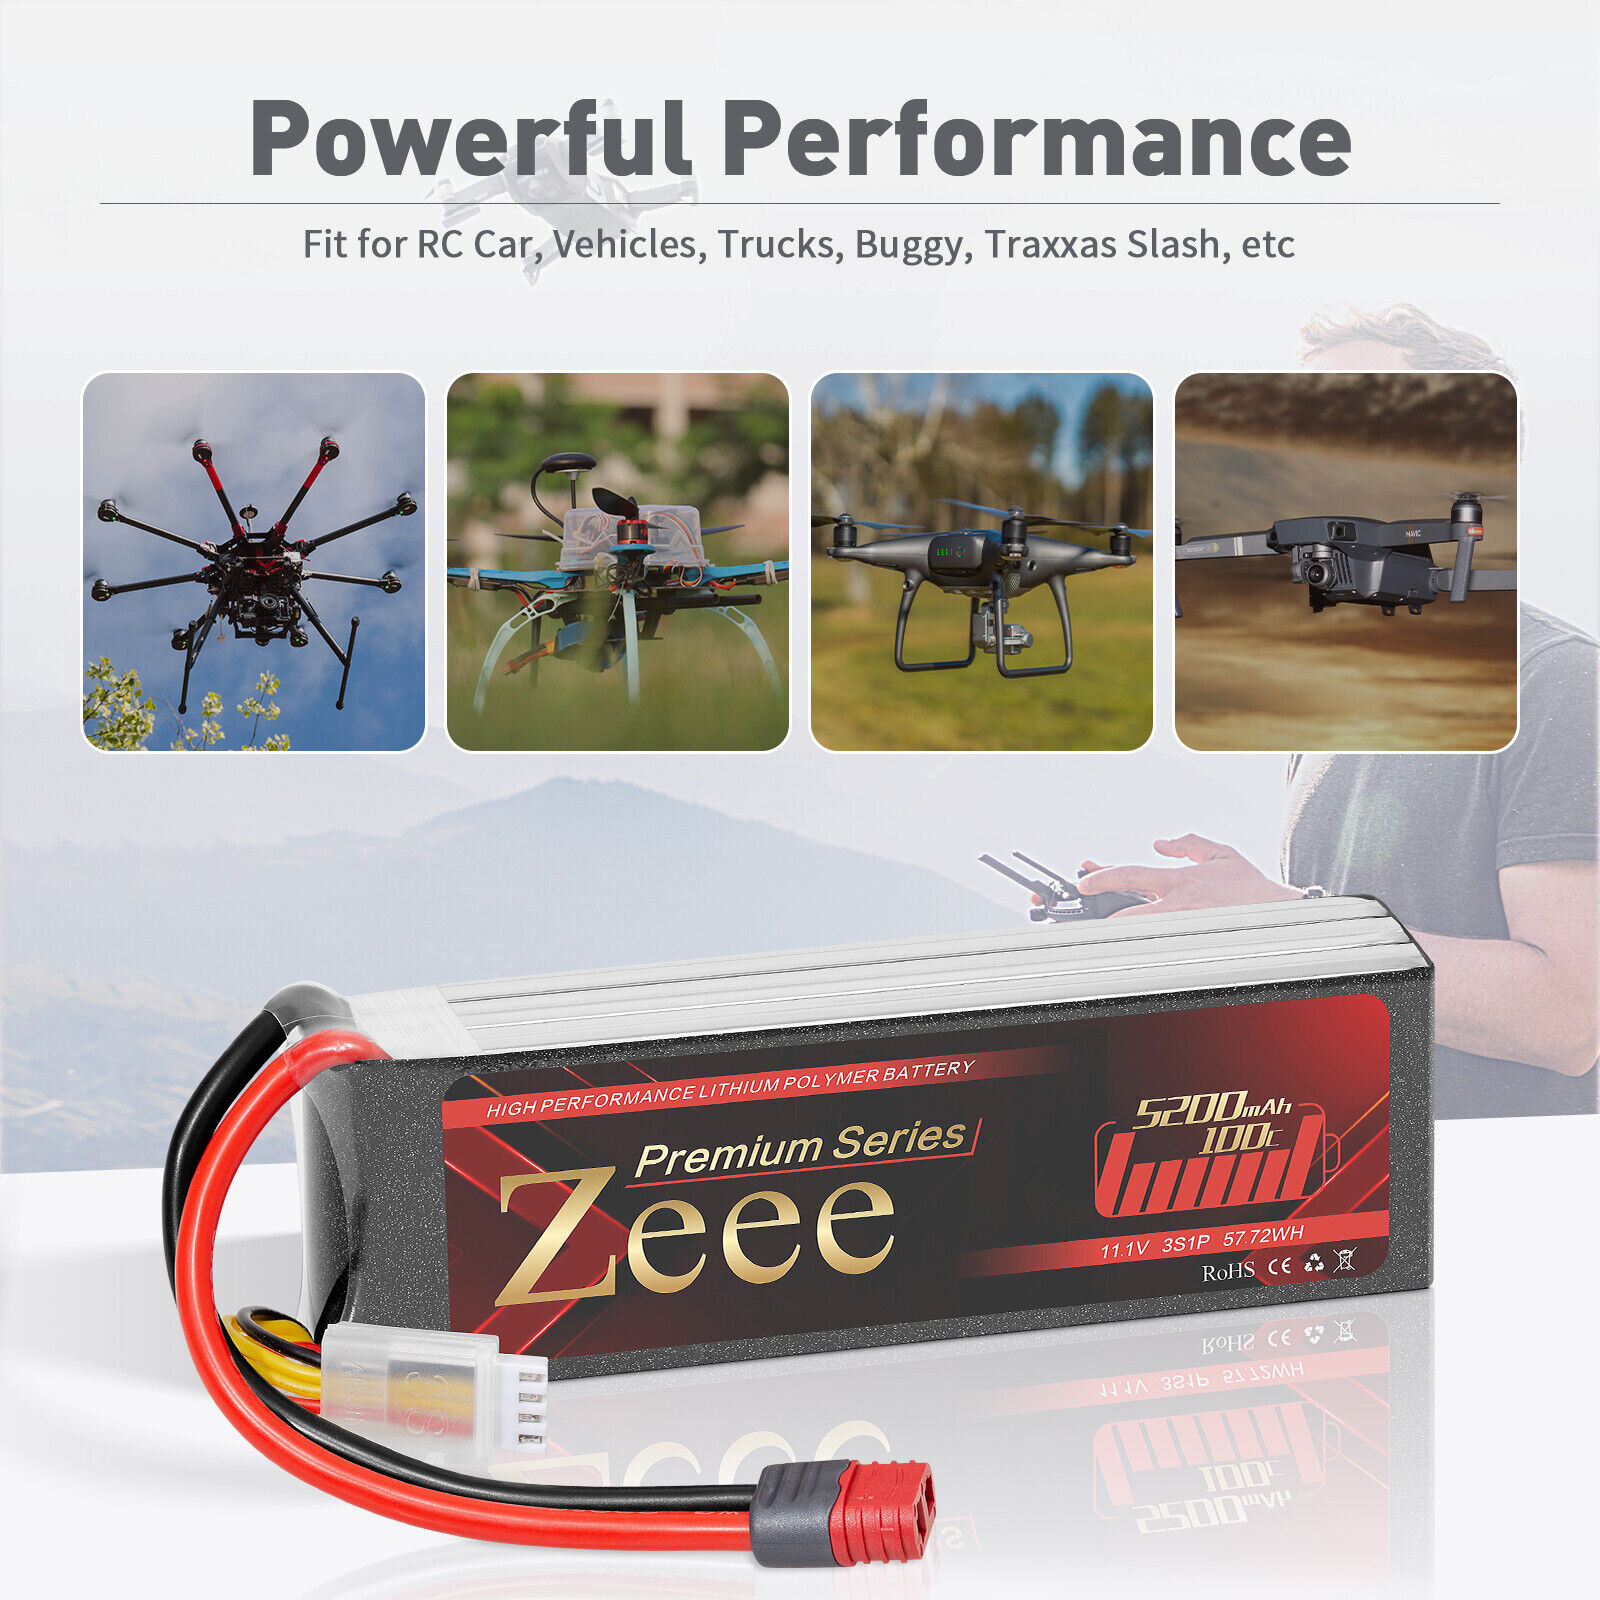 2x Zeee 3S LiPo Battery 11.1V 100C 5200mAh Deans for RC Car Helicopter Truck ZEEE Does Not Apply - фотография #5